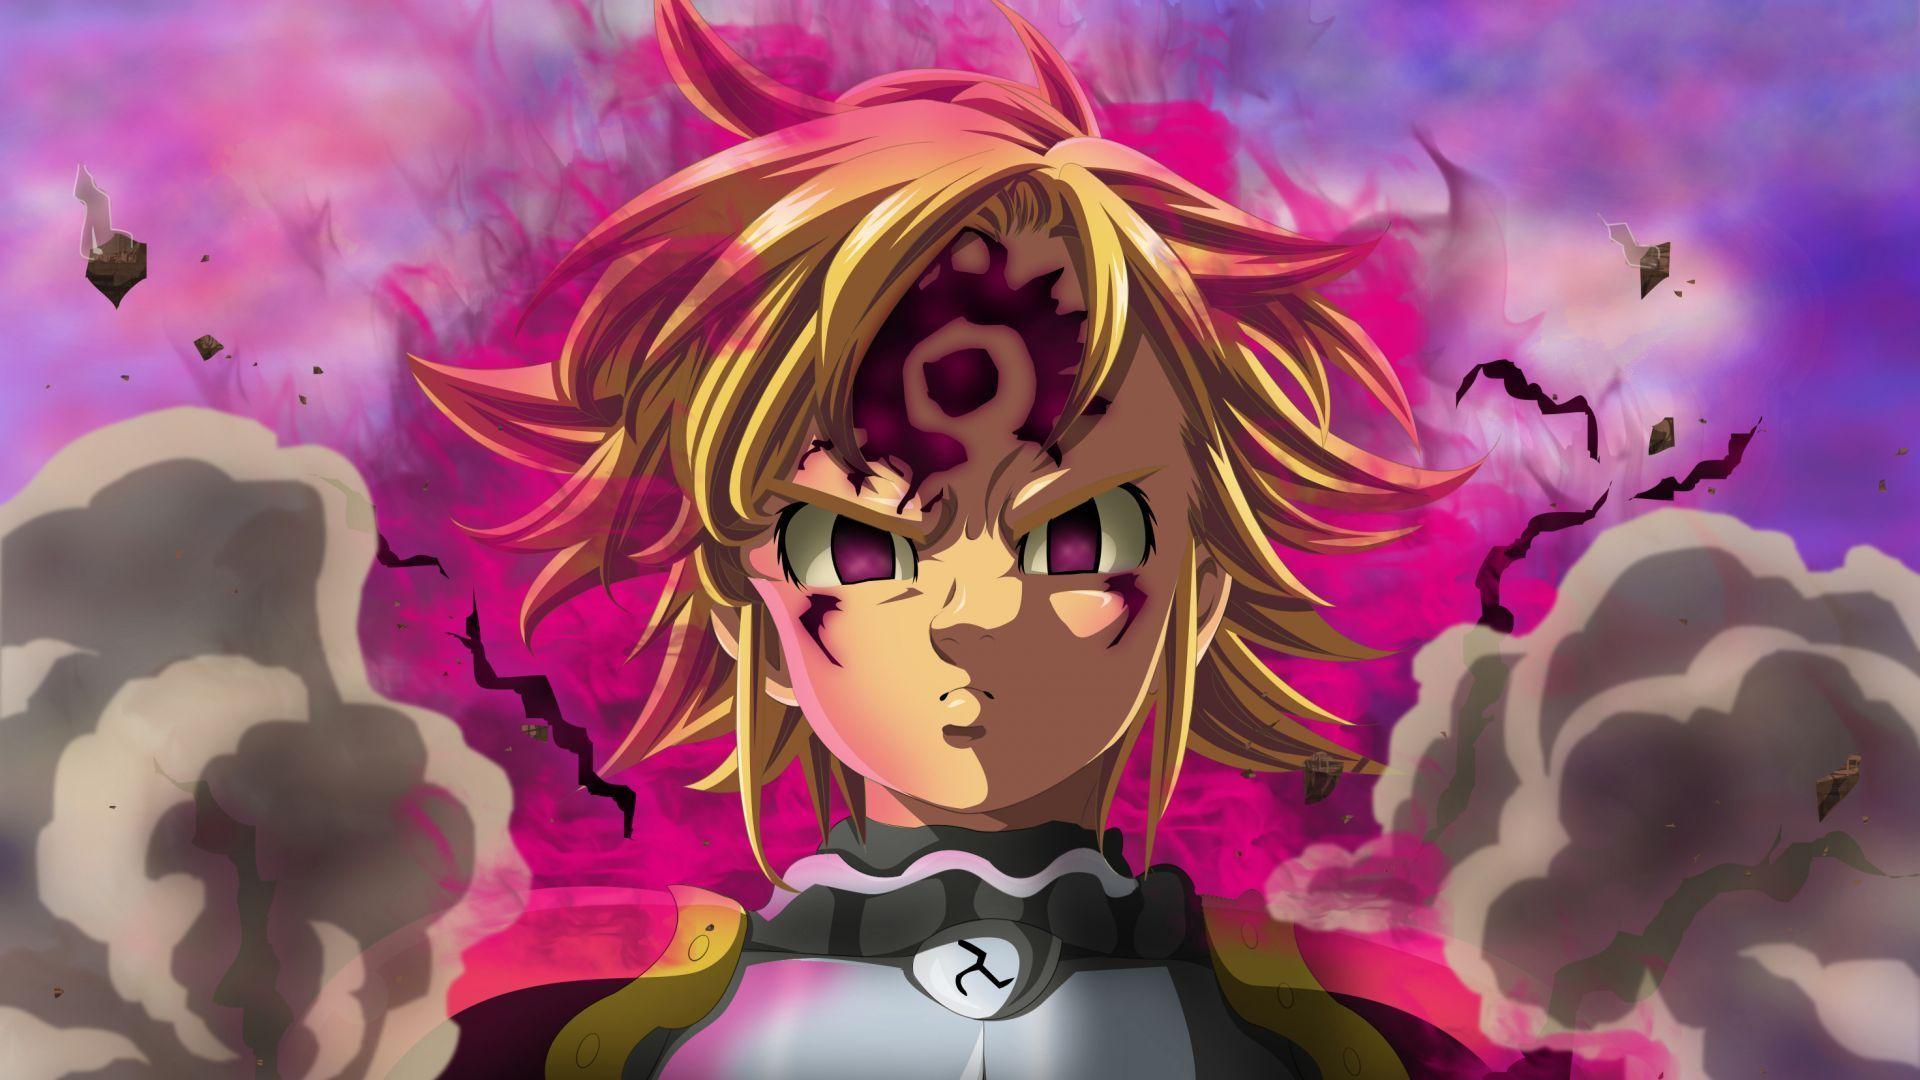 Download wallpapers of Meliodas, Seven Deadly Sins, Anime,